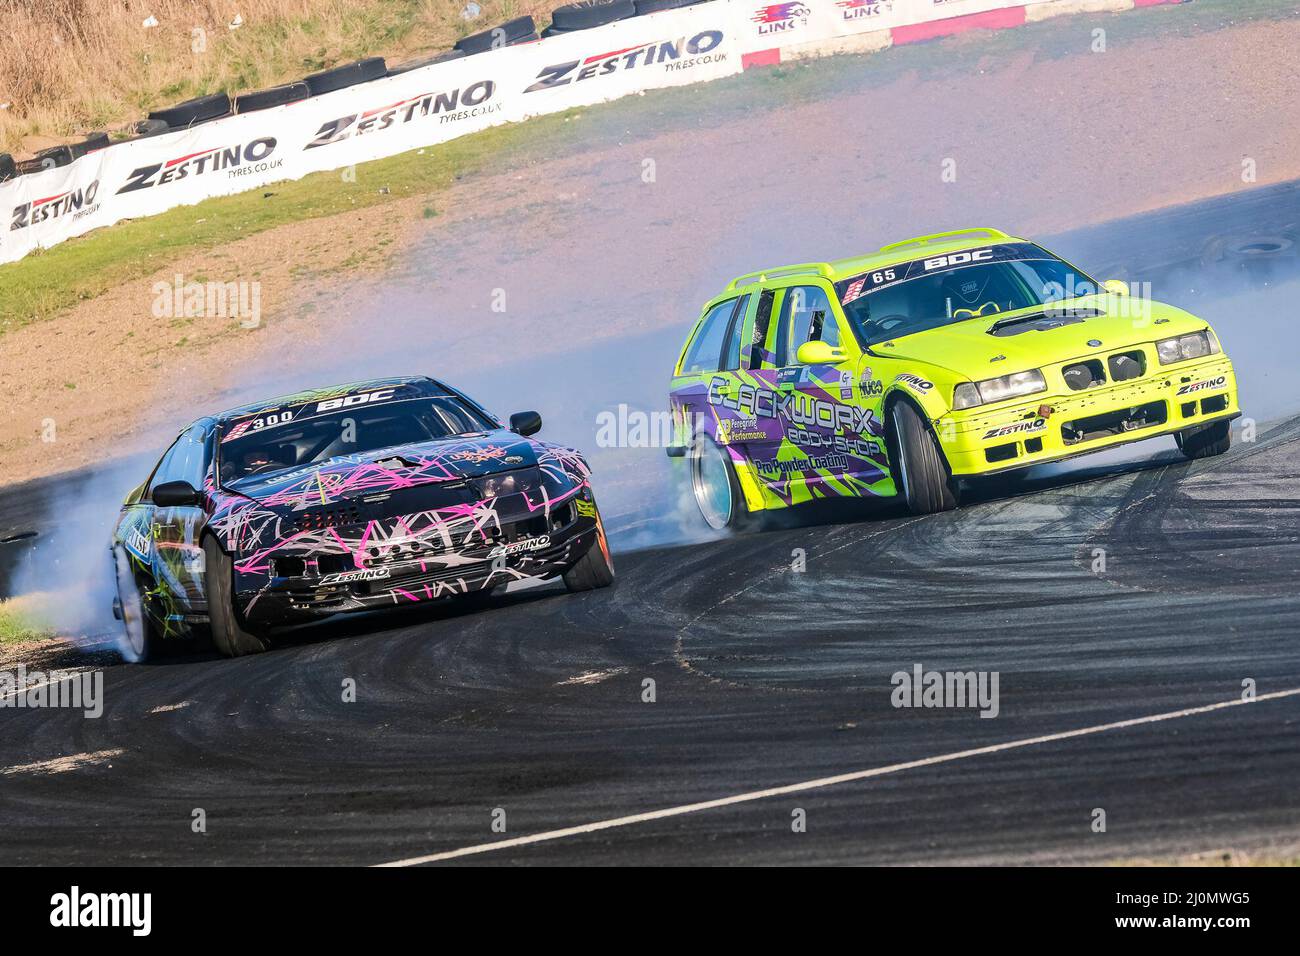 Middlesbrough, UK. 20th Mar, 2022. Billy Burrray BMW Chases down Egis Manelga Nissan 300ZX Teeside Autodrome, Middlesbrough, United Kingdom on 20 March 2022 during Round 1 of the 2022 British Drift Championship, Craig McAllister Credit: Every Second Media/Alamy Live News Stock Photo